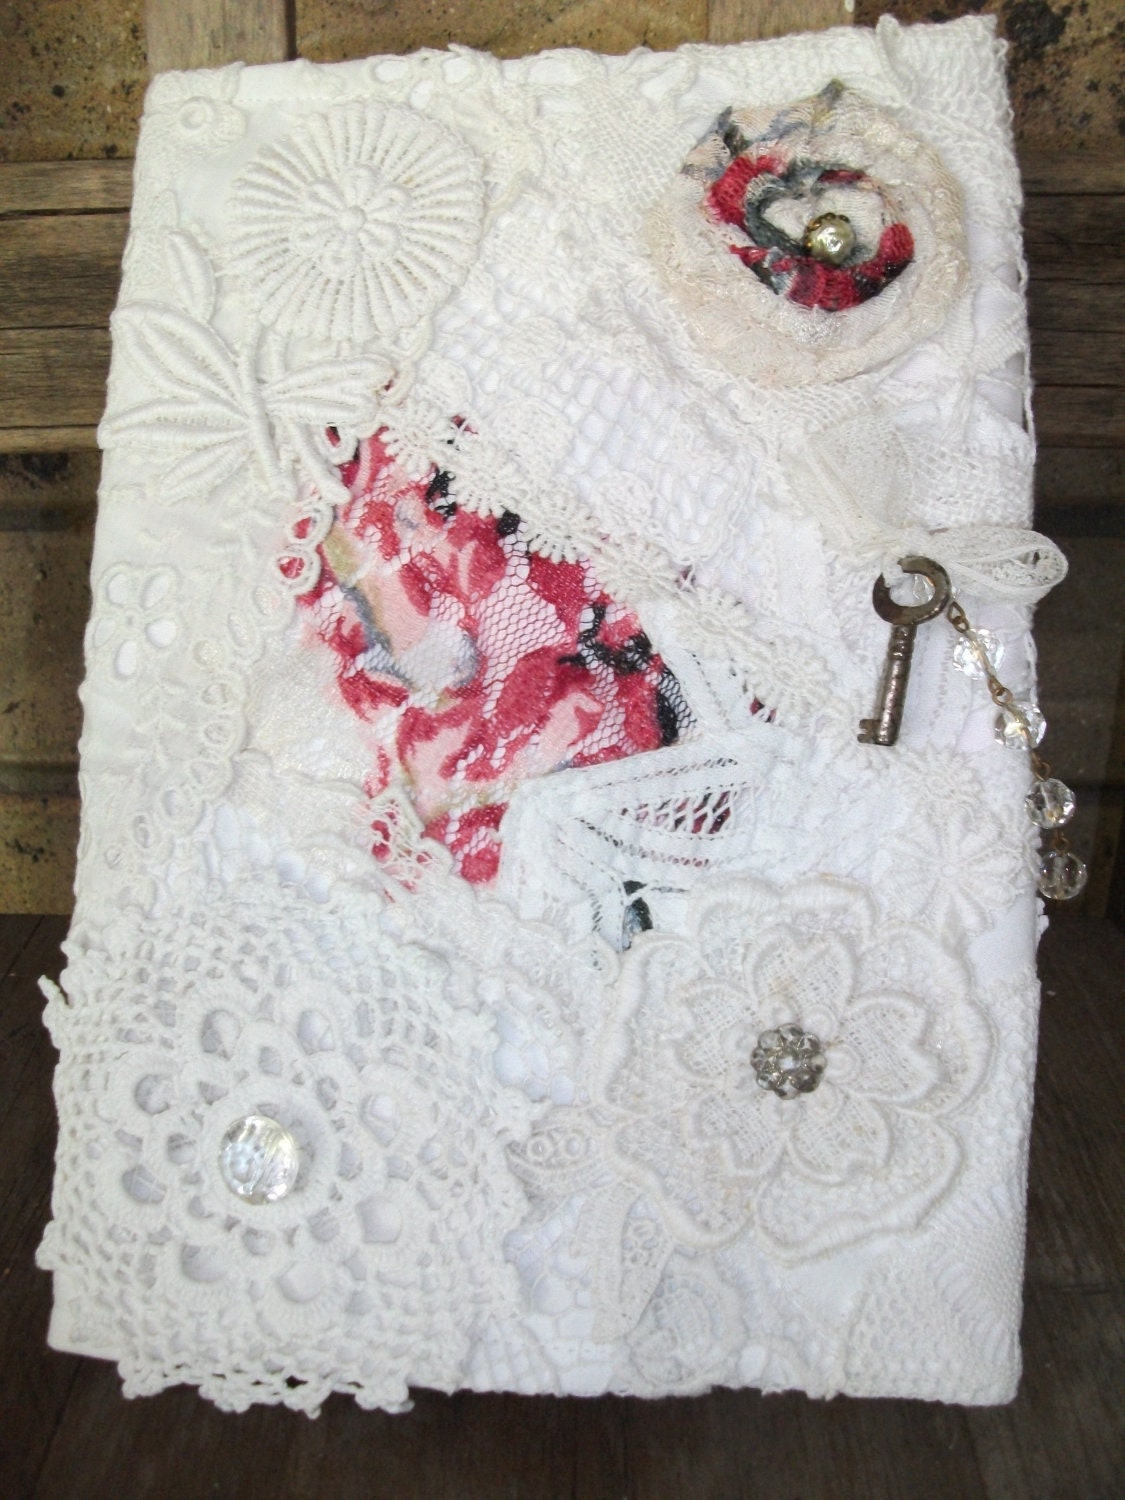 Repurposed Romantic Vintage White Lace Journal Cover, Includes Hardcover Journal, Ooak